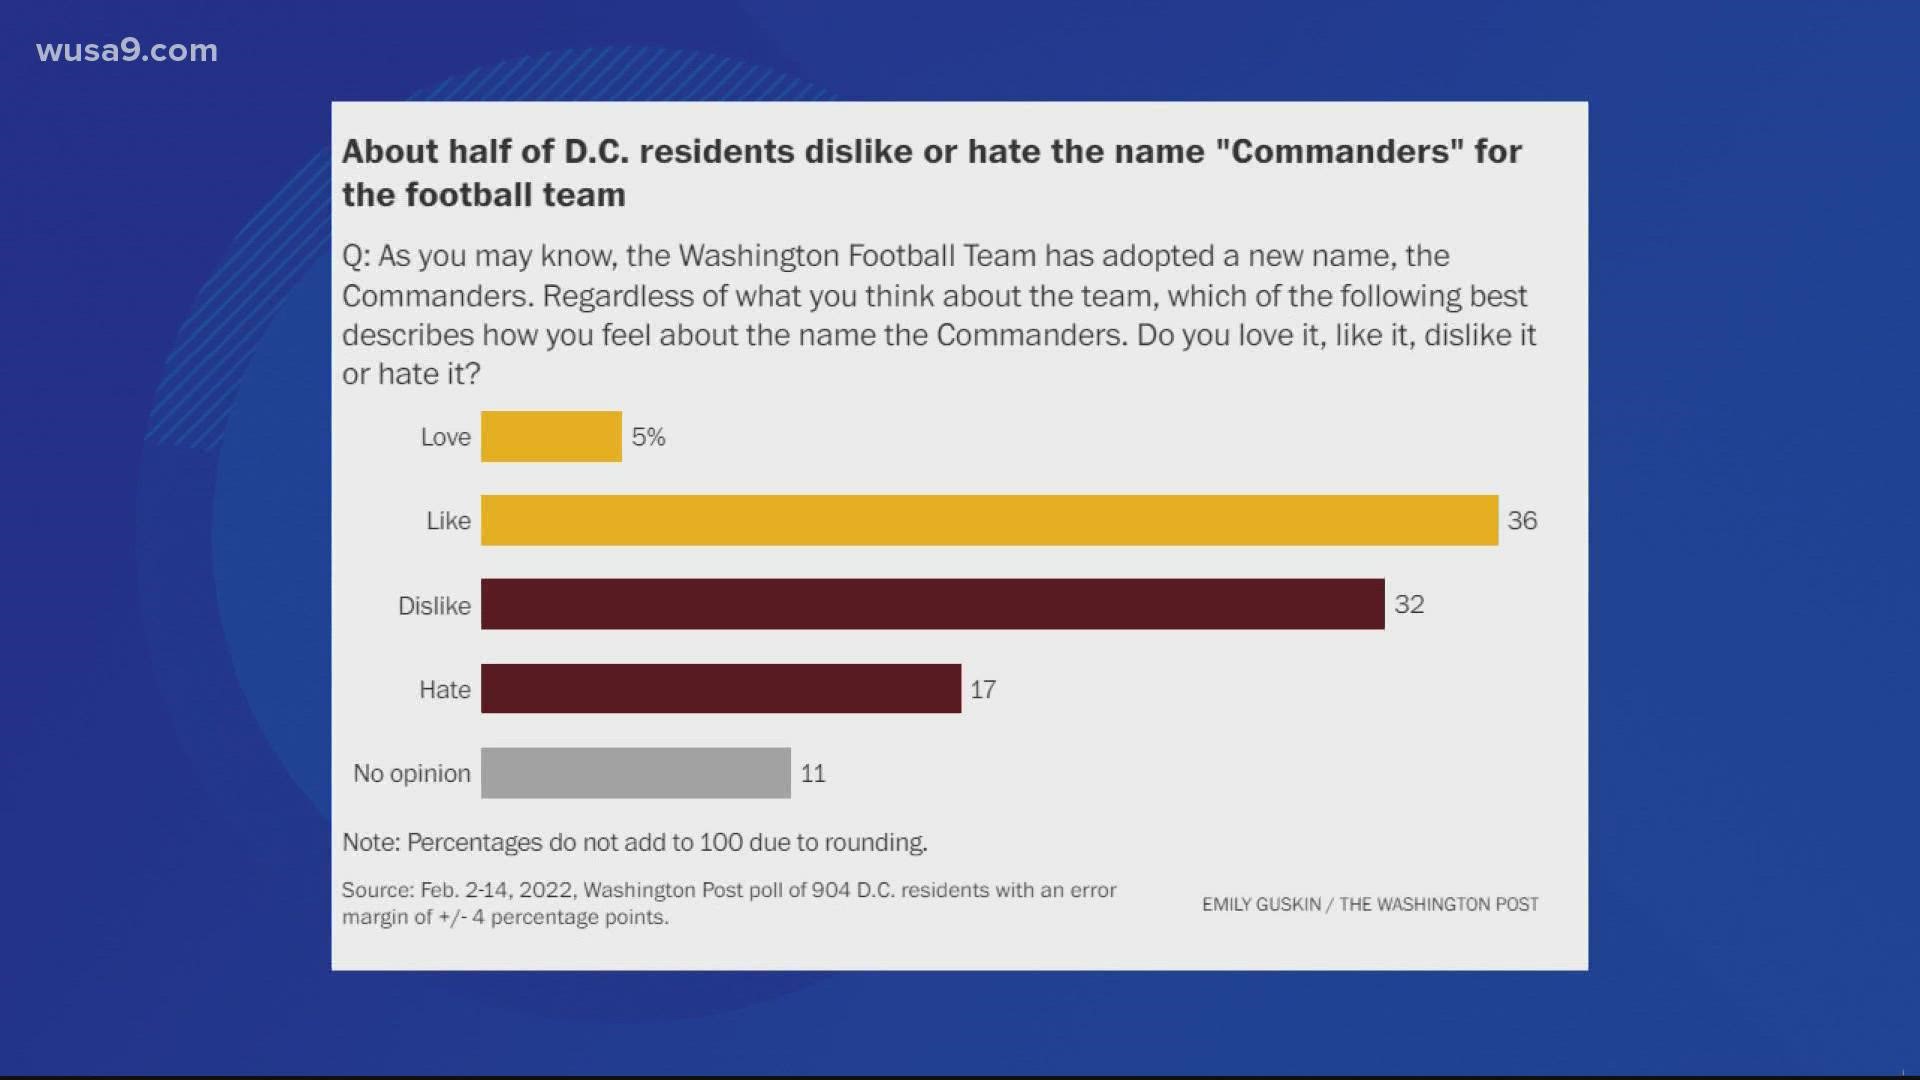 About half of D.C. residents say they dislike the name.